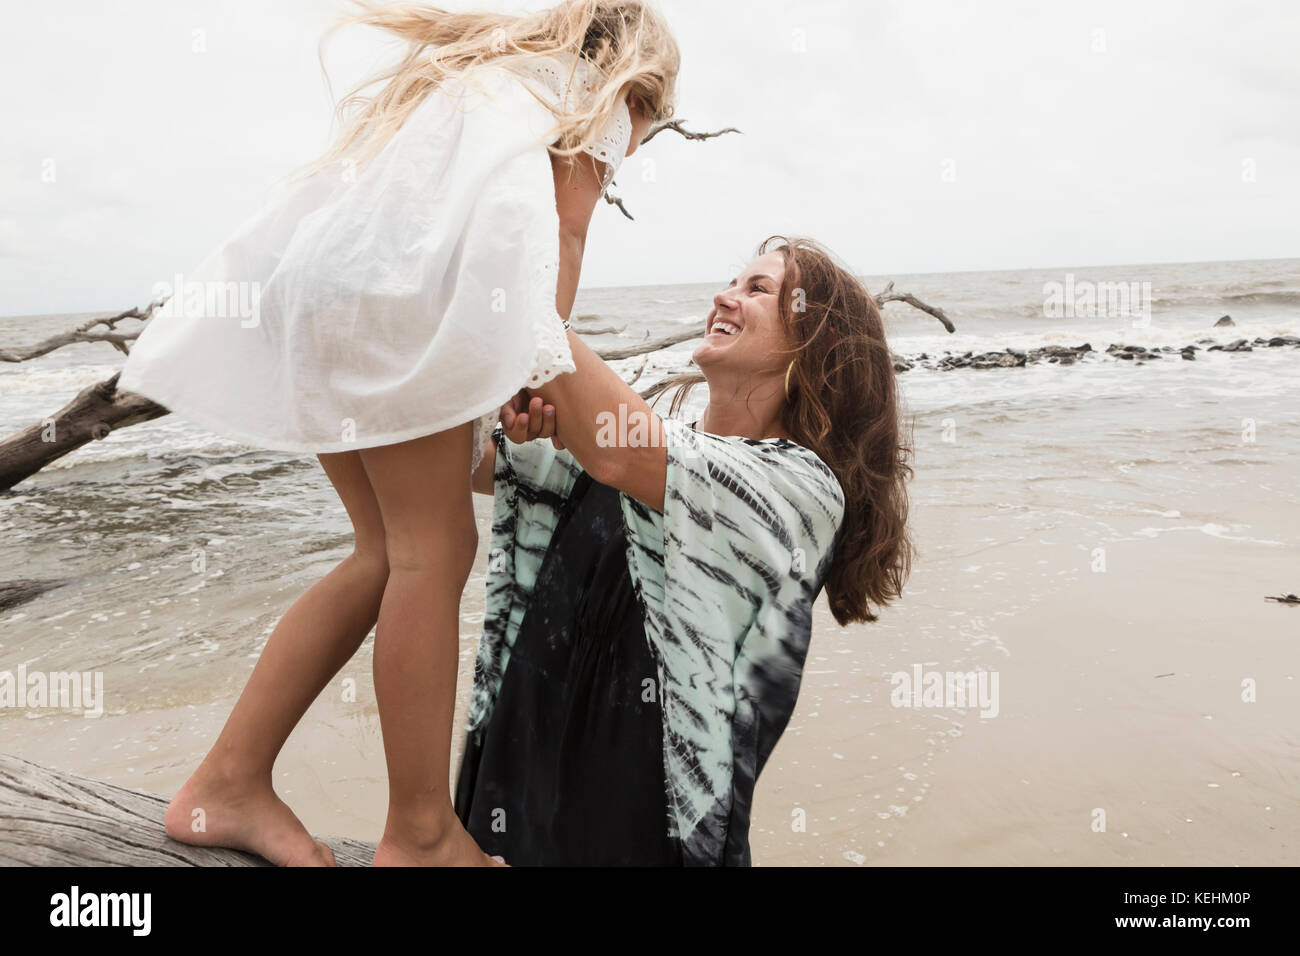 Caucasian mother and daughter playing on driftwood on beach Stock Photo